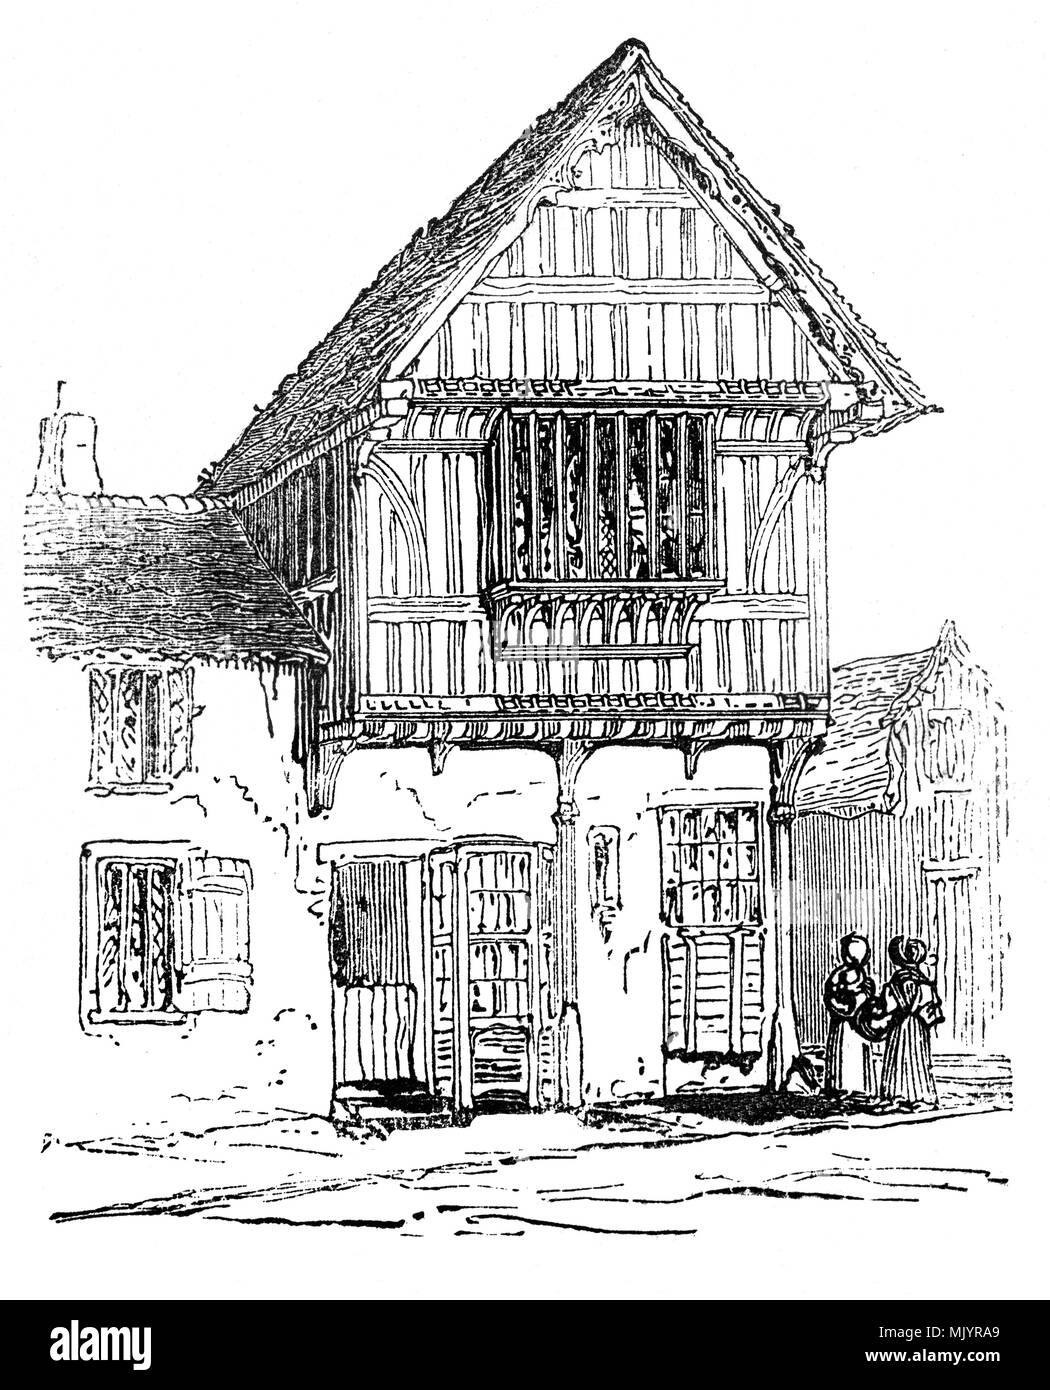 The 15th Century house in Leicester where King Richard III is said to have spent the night before the Battle of Bosworth, the last significant skirmish in the War of the Roses. By day's end on August 22, 1485, Richard, the last of the Yorkist Plantagenet line was dead, leaving the victor Henry Tudor to be crowned Henry VII. Stock Photo